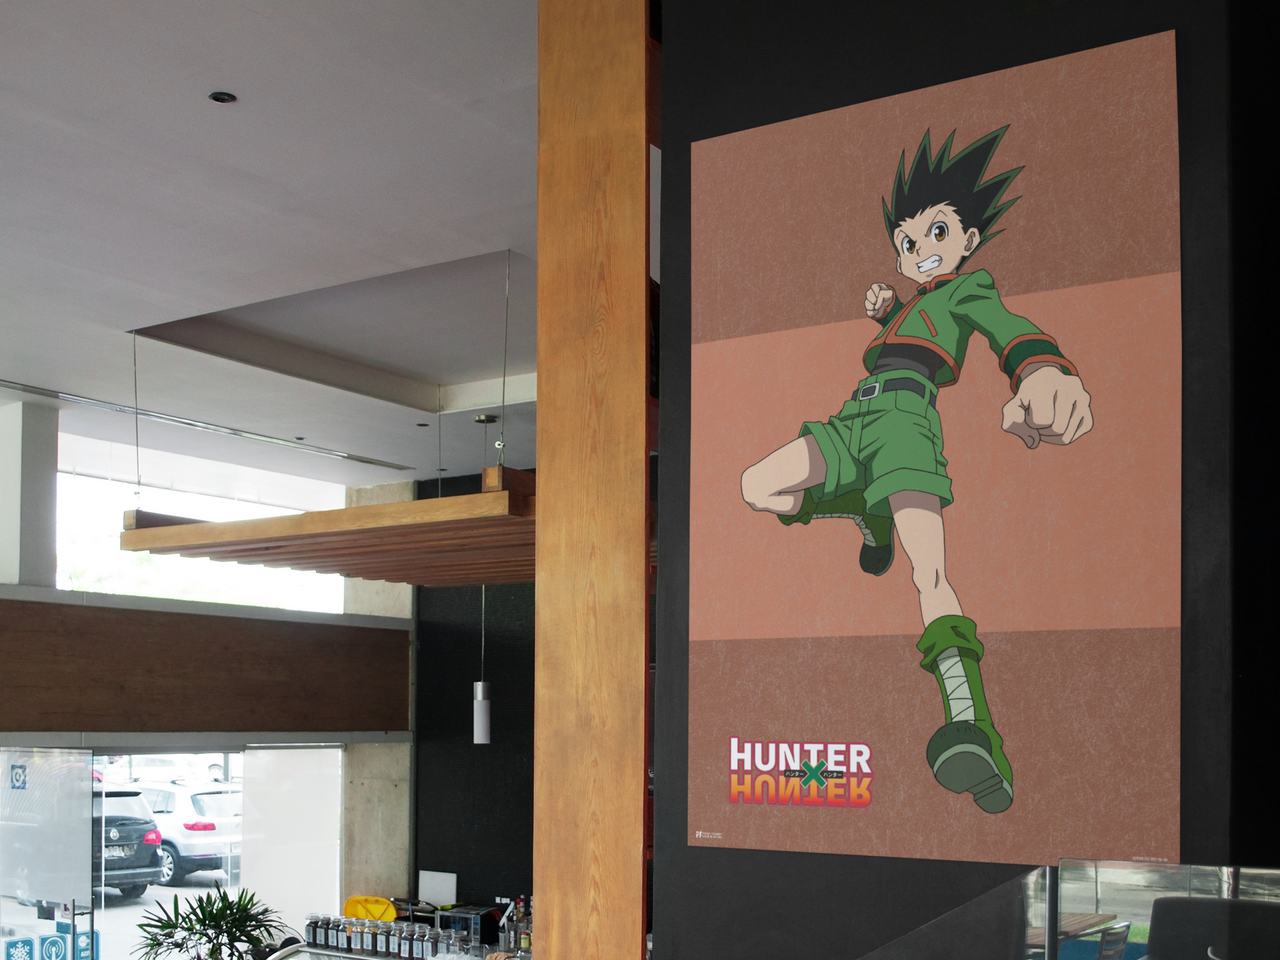  Hunter X Hunter Anime Merch Wall Decor Movie Posters HxH Anime  Posters Association Graphic Wall Art Cool Decoration Room Home Decor  Japanese Manga Series Fans Cool Wall Decor Art Print Poster